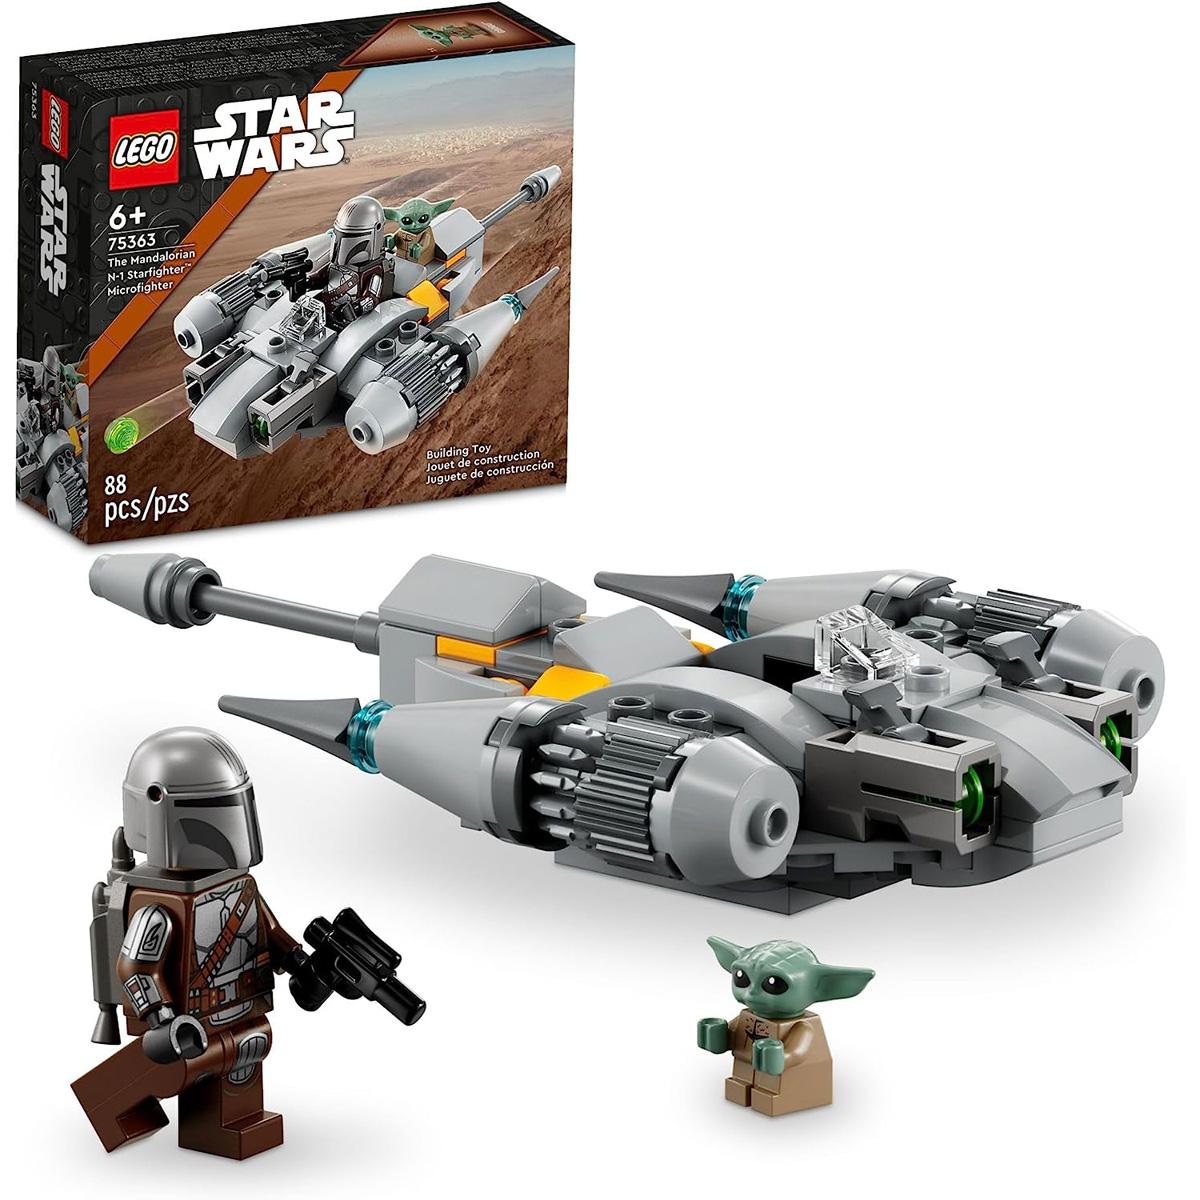 LEGO Star Wars The Mandalorian N-1 Starfighter Microfighter Building Toy for $11.42